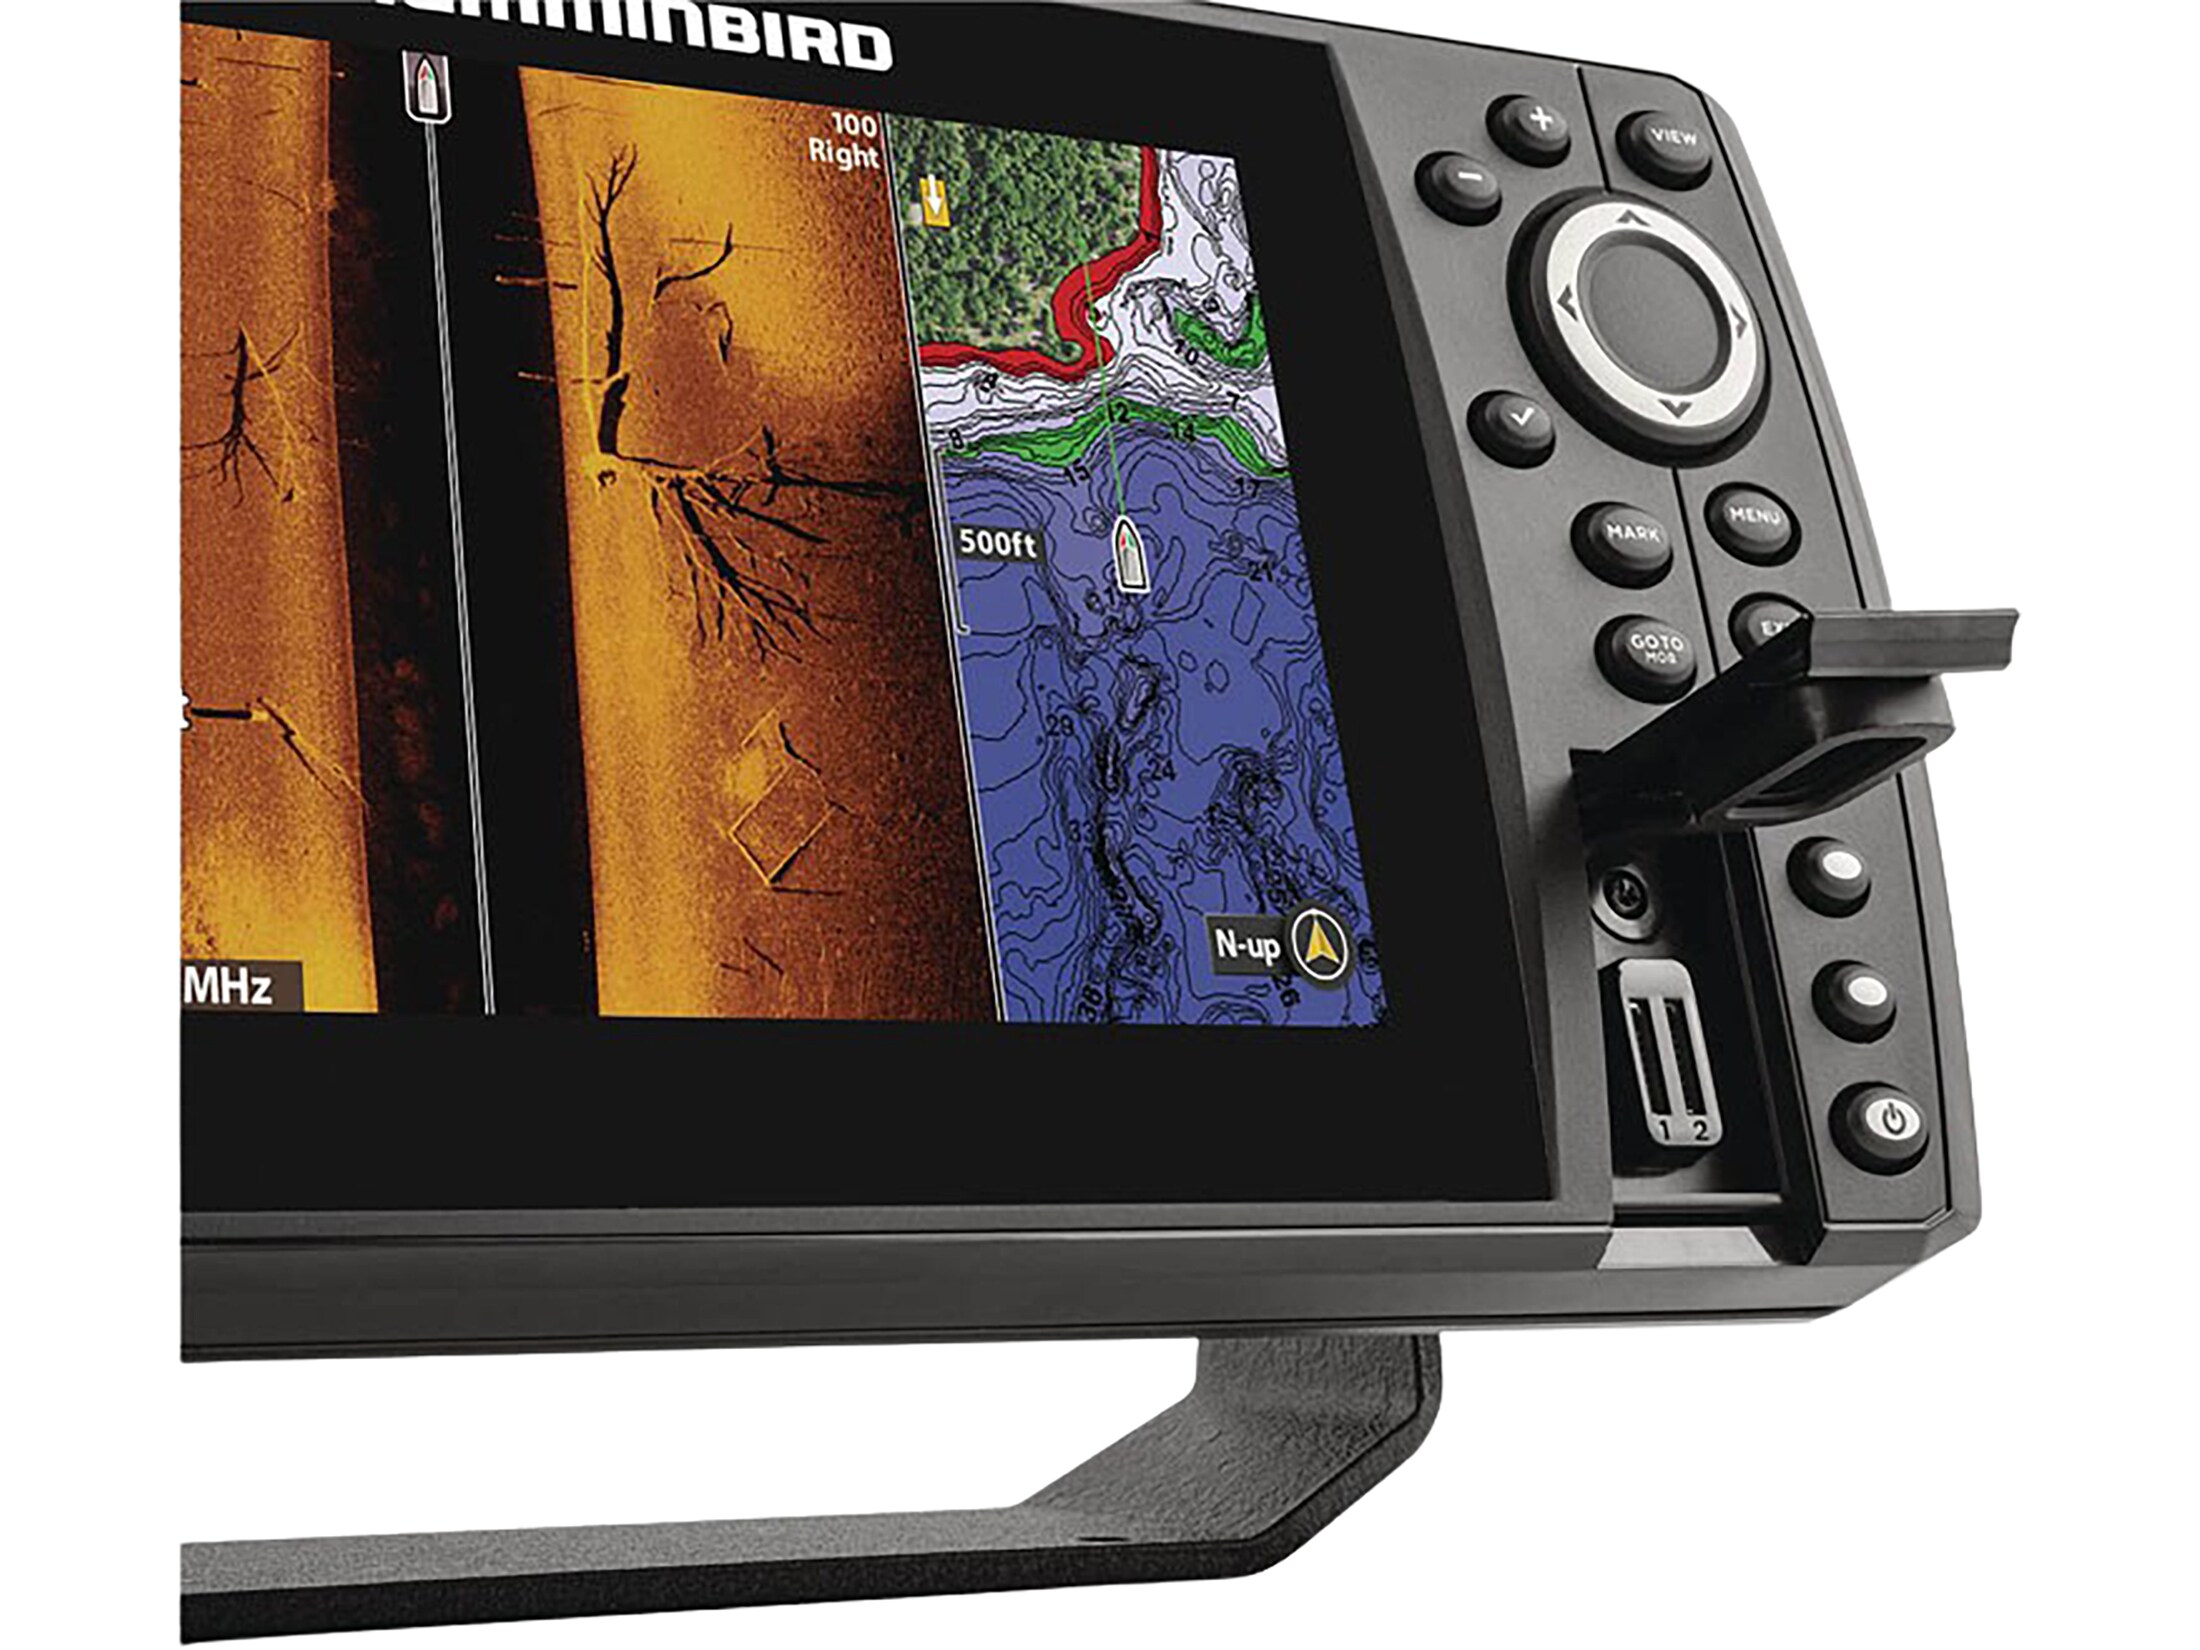 Need Humminbird Gear for Less. Try This Electronics Outlet